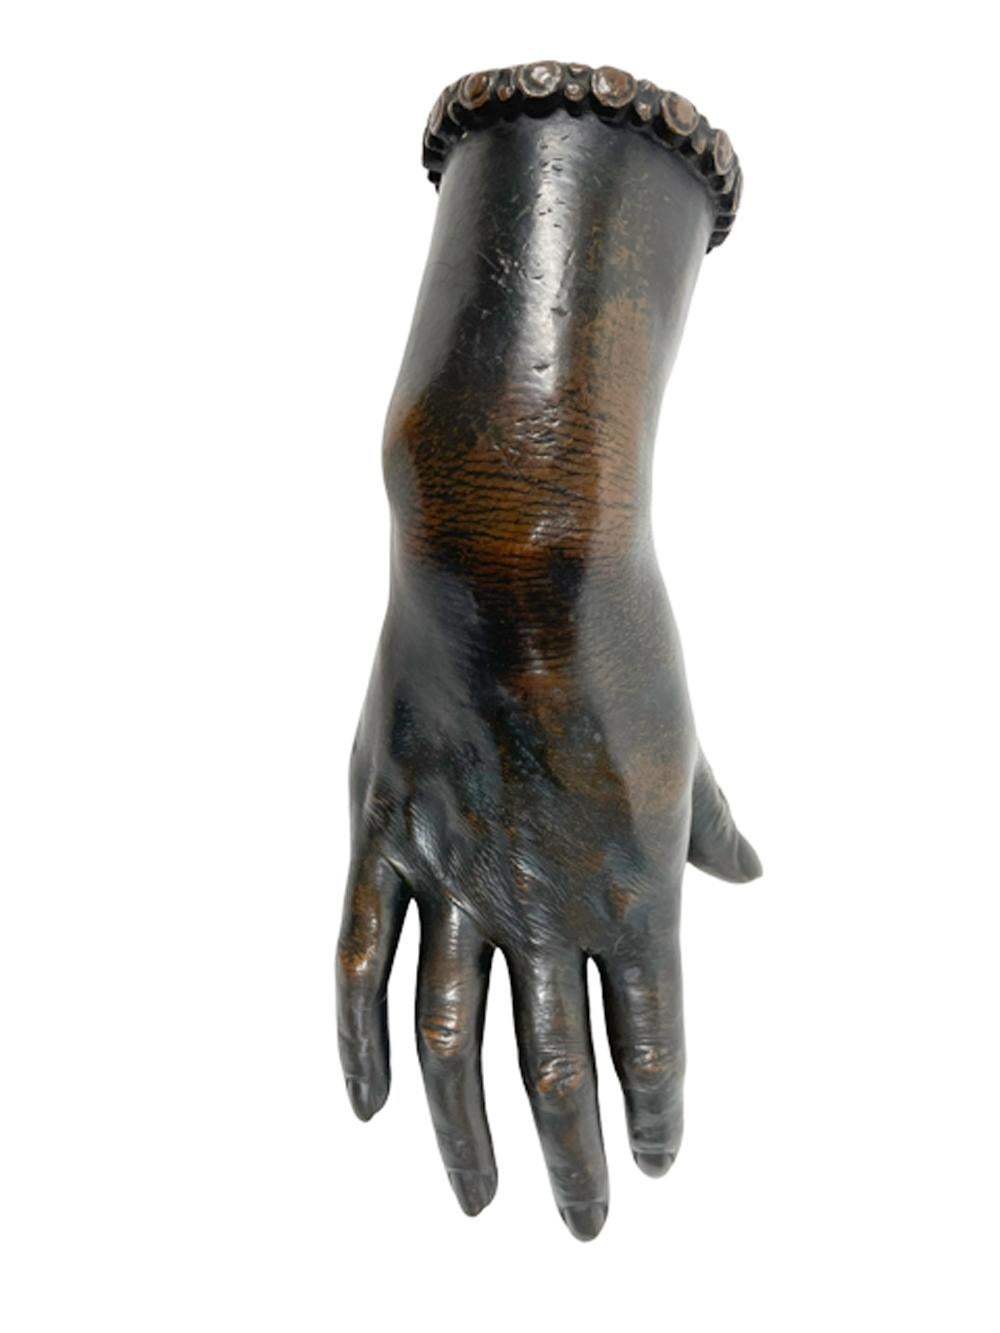 Art Deco Life-Size Patinated Cast Bronze Model of a Female Hand Dated 1926 For Sale 1